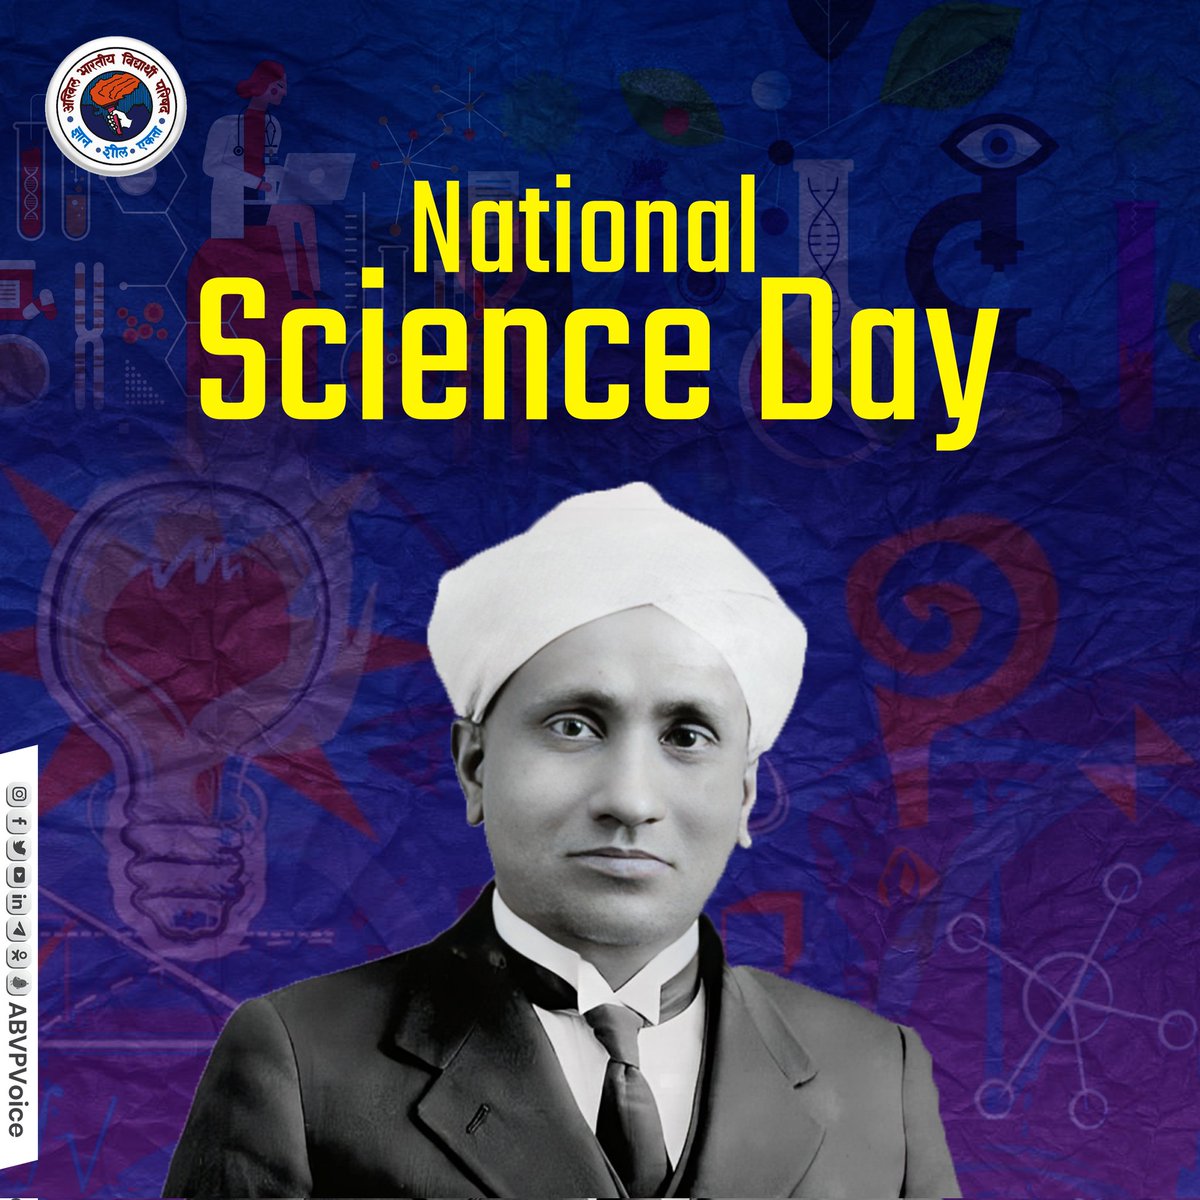 Our humble tributes to the eminent scientist, Nobel laureate Bharat Ratna #CVRaman Ji on #NationalScienceDay. 

He made groundbreaking work in the field of light scattering popularly known as the Raman effect. His contribution to science will inspire young generations to innovate…